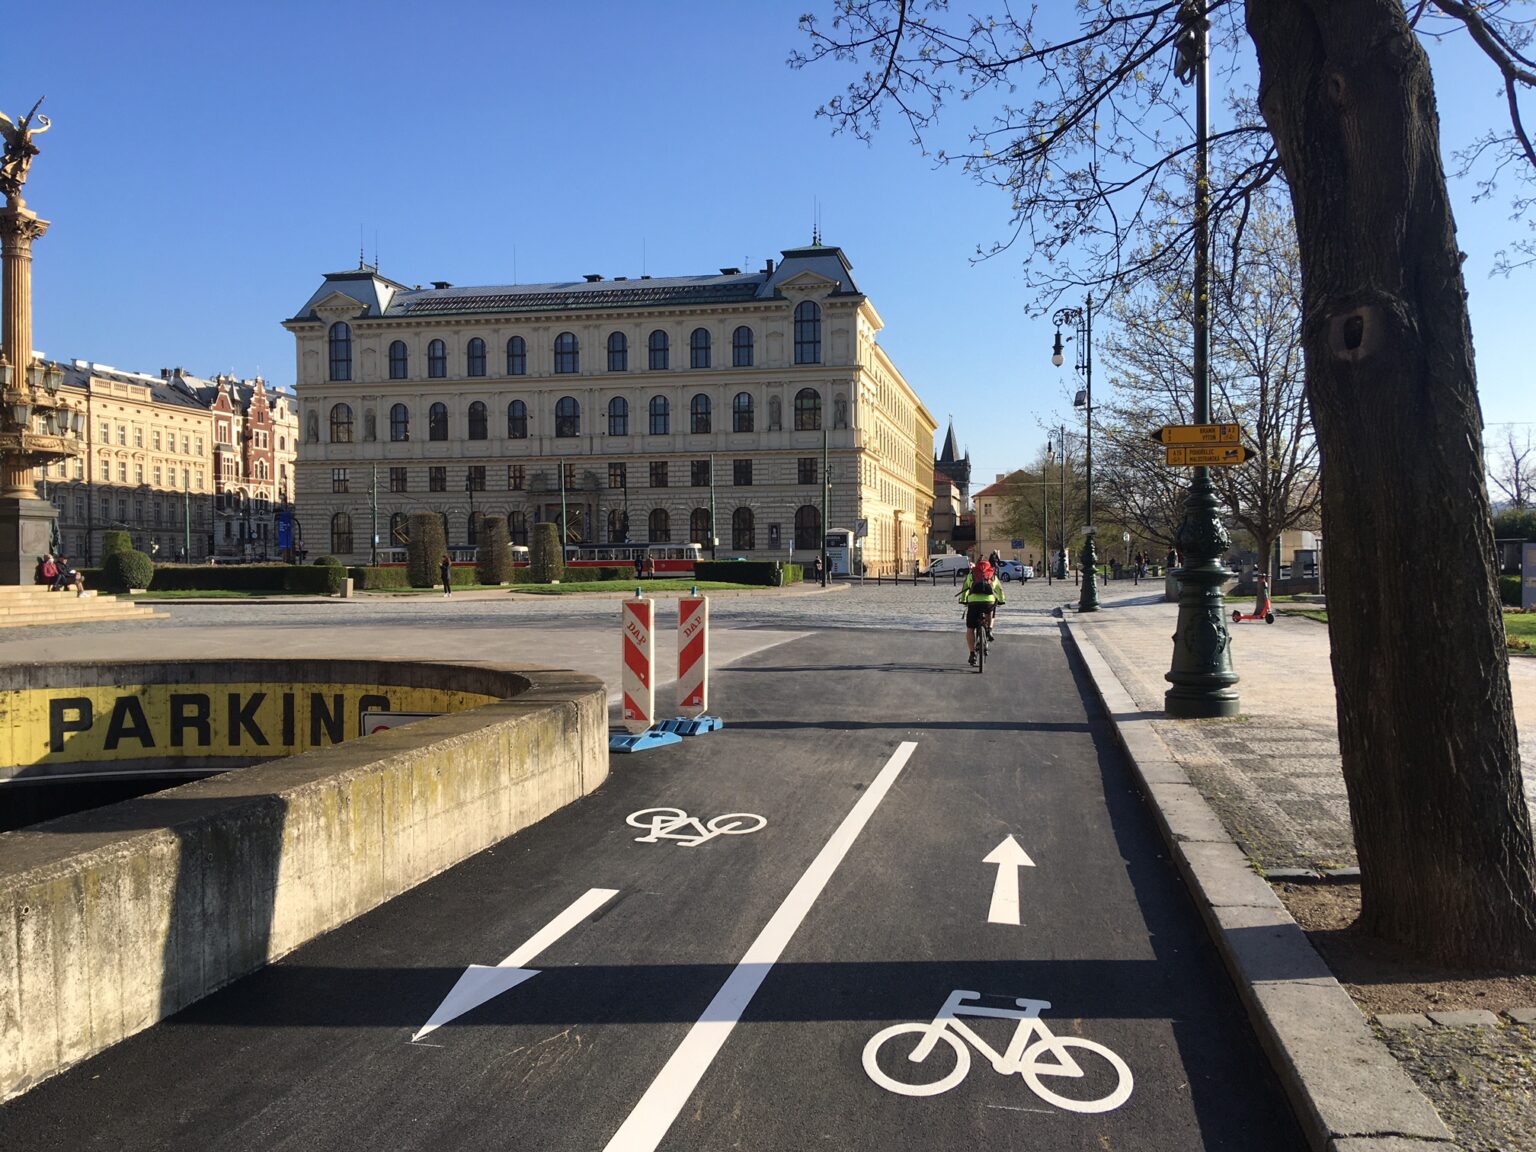 In front of Rudolfinum, the smooth asphalt ends, and it is necessary to continue on rough cobblestones without cycle lanes. Zdroj: Jiří Motýl